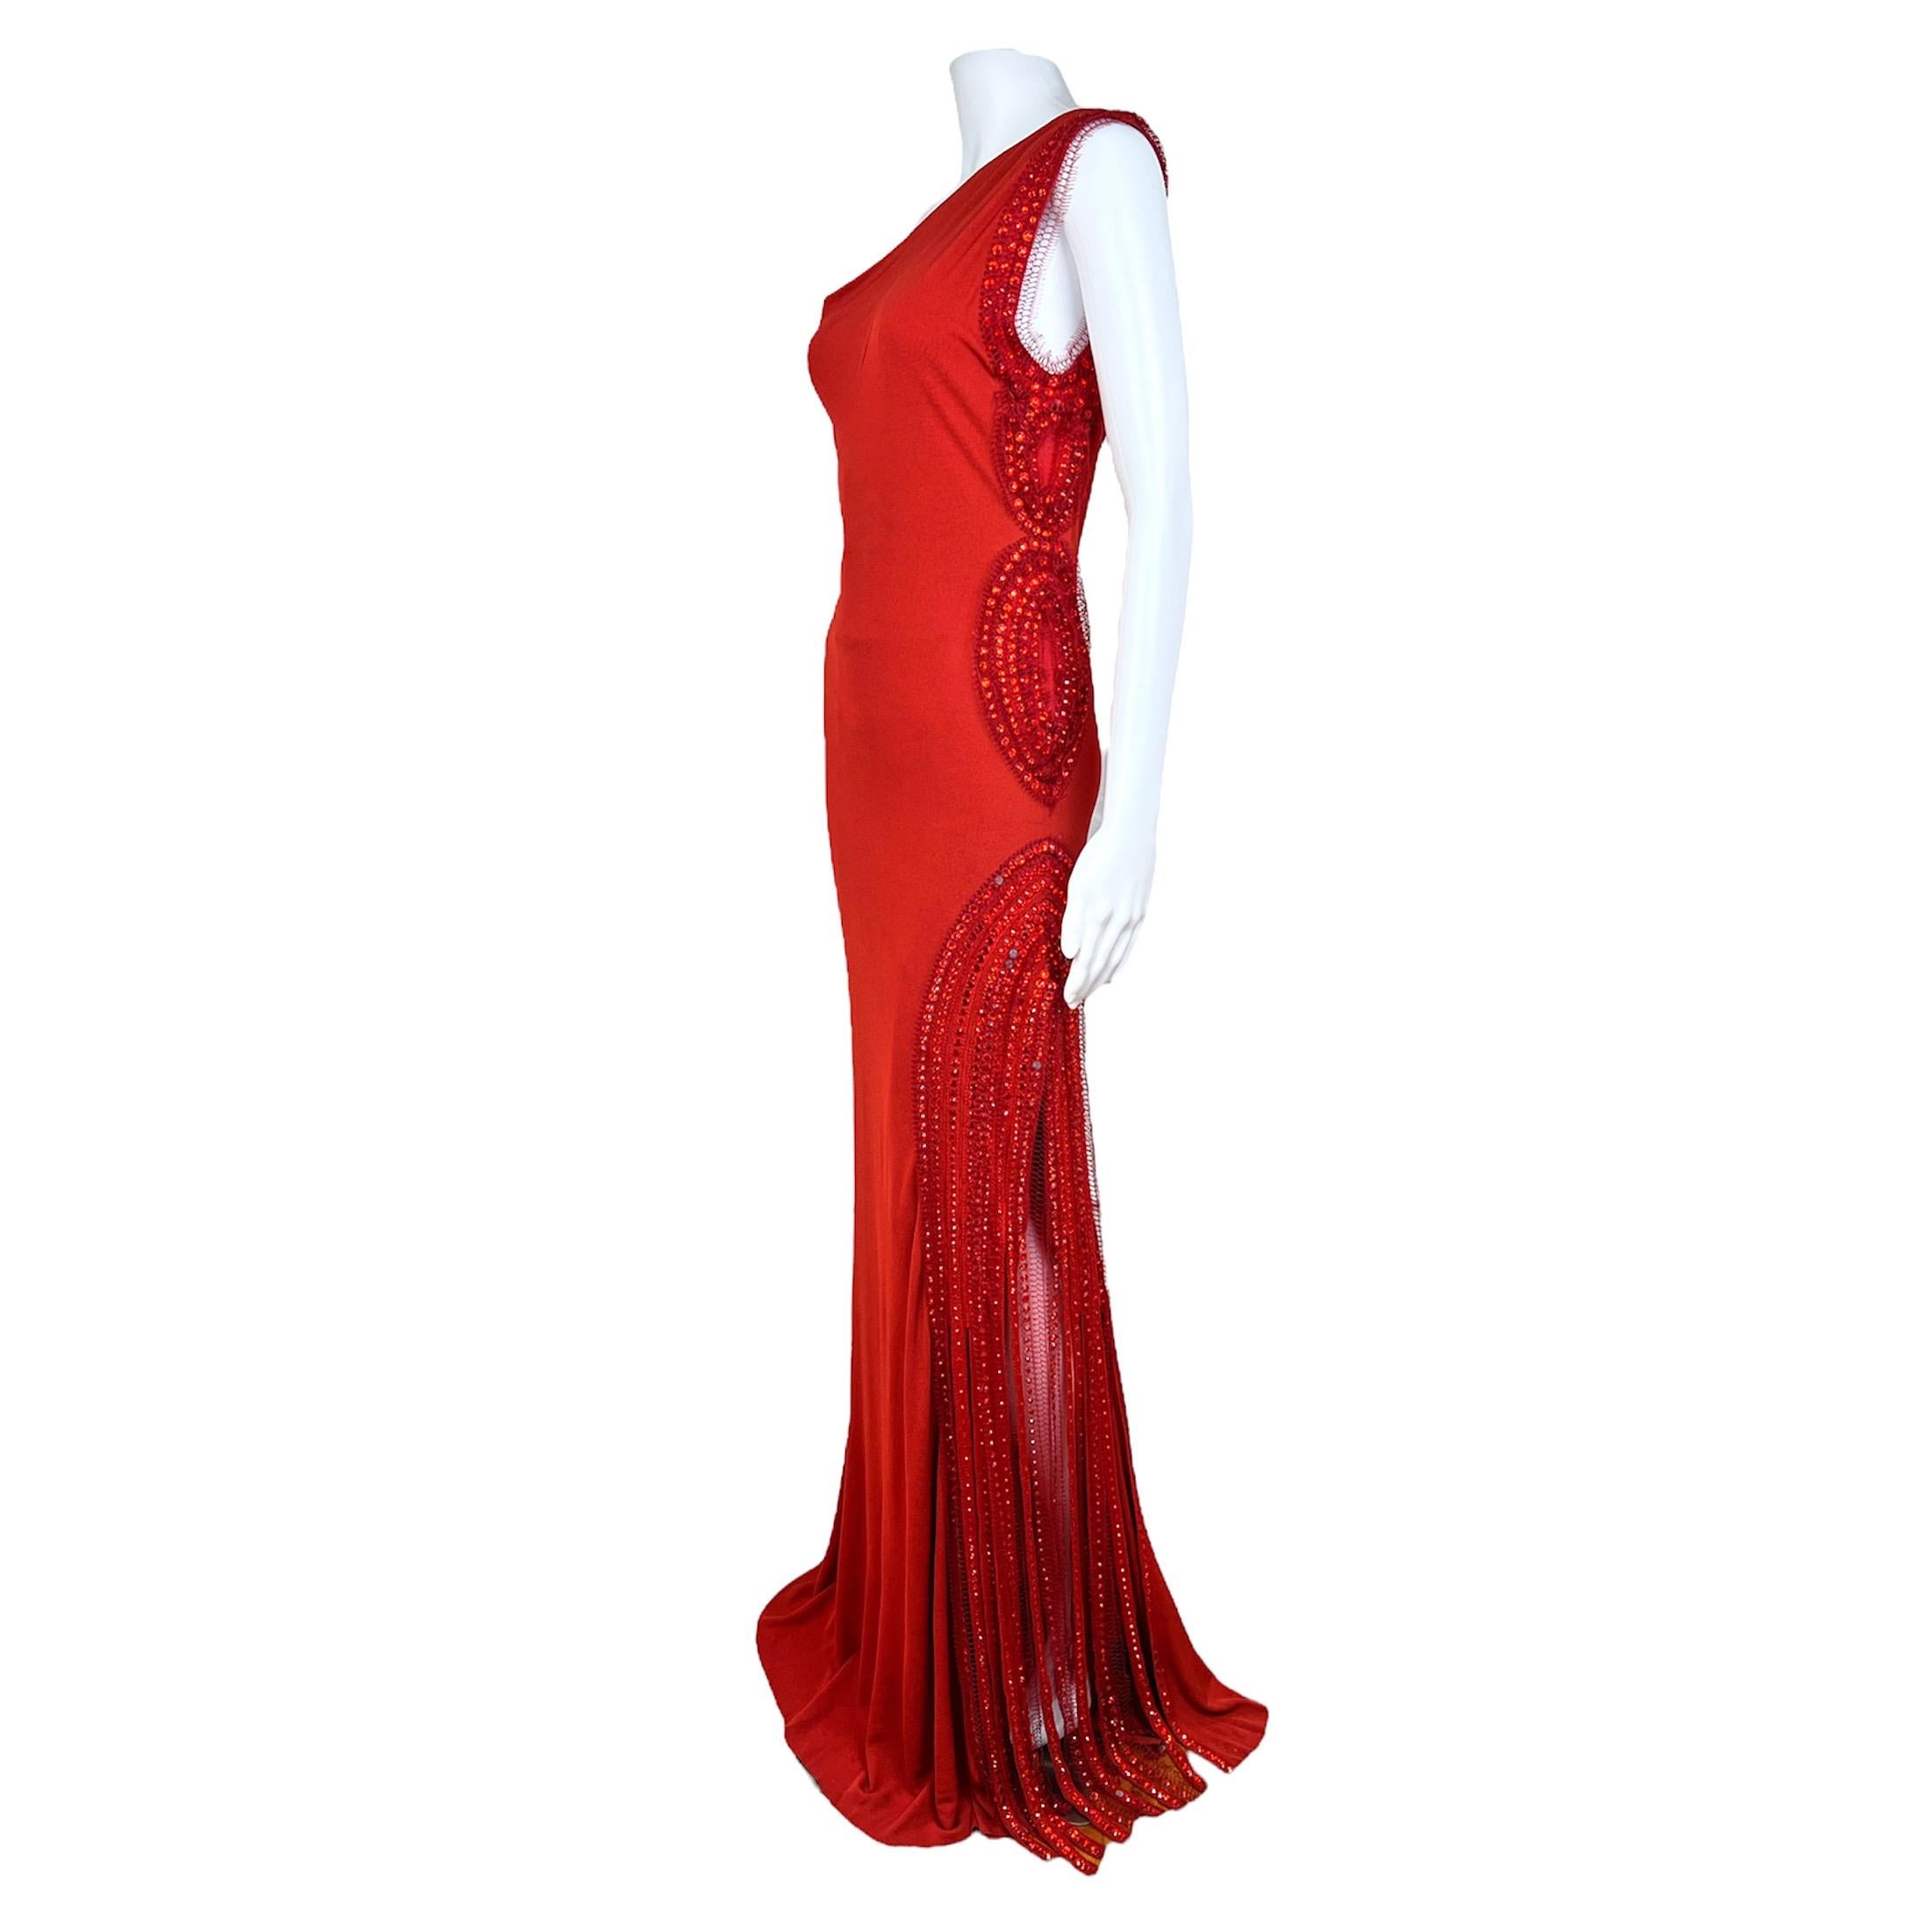 Gorgeous vintage Jean-Paul Gaultier one shoulder red gown with slit from the 2000s. The gown is made out of silk and mesh material and has beads appliqués and fringes on the left side of the body. The dress is completely lined with mesh material.